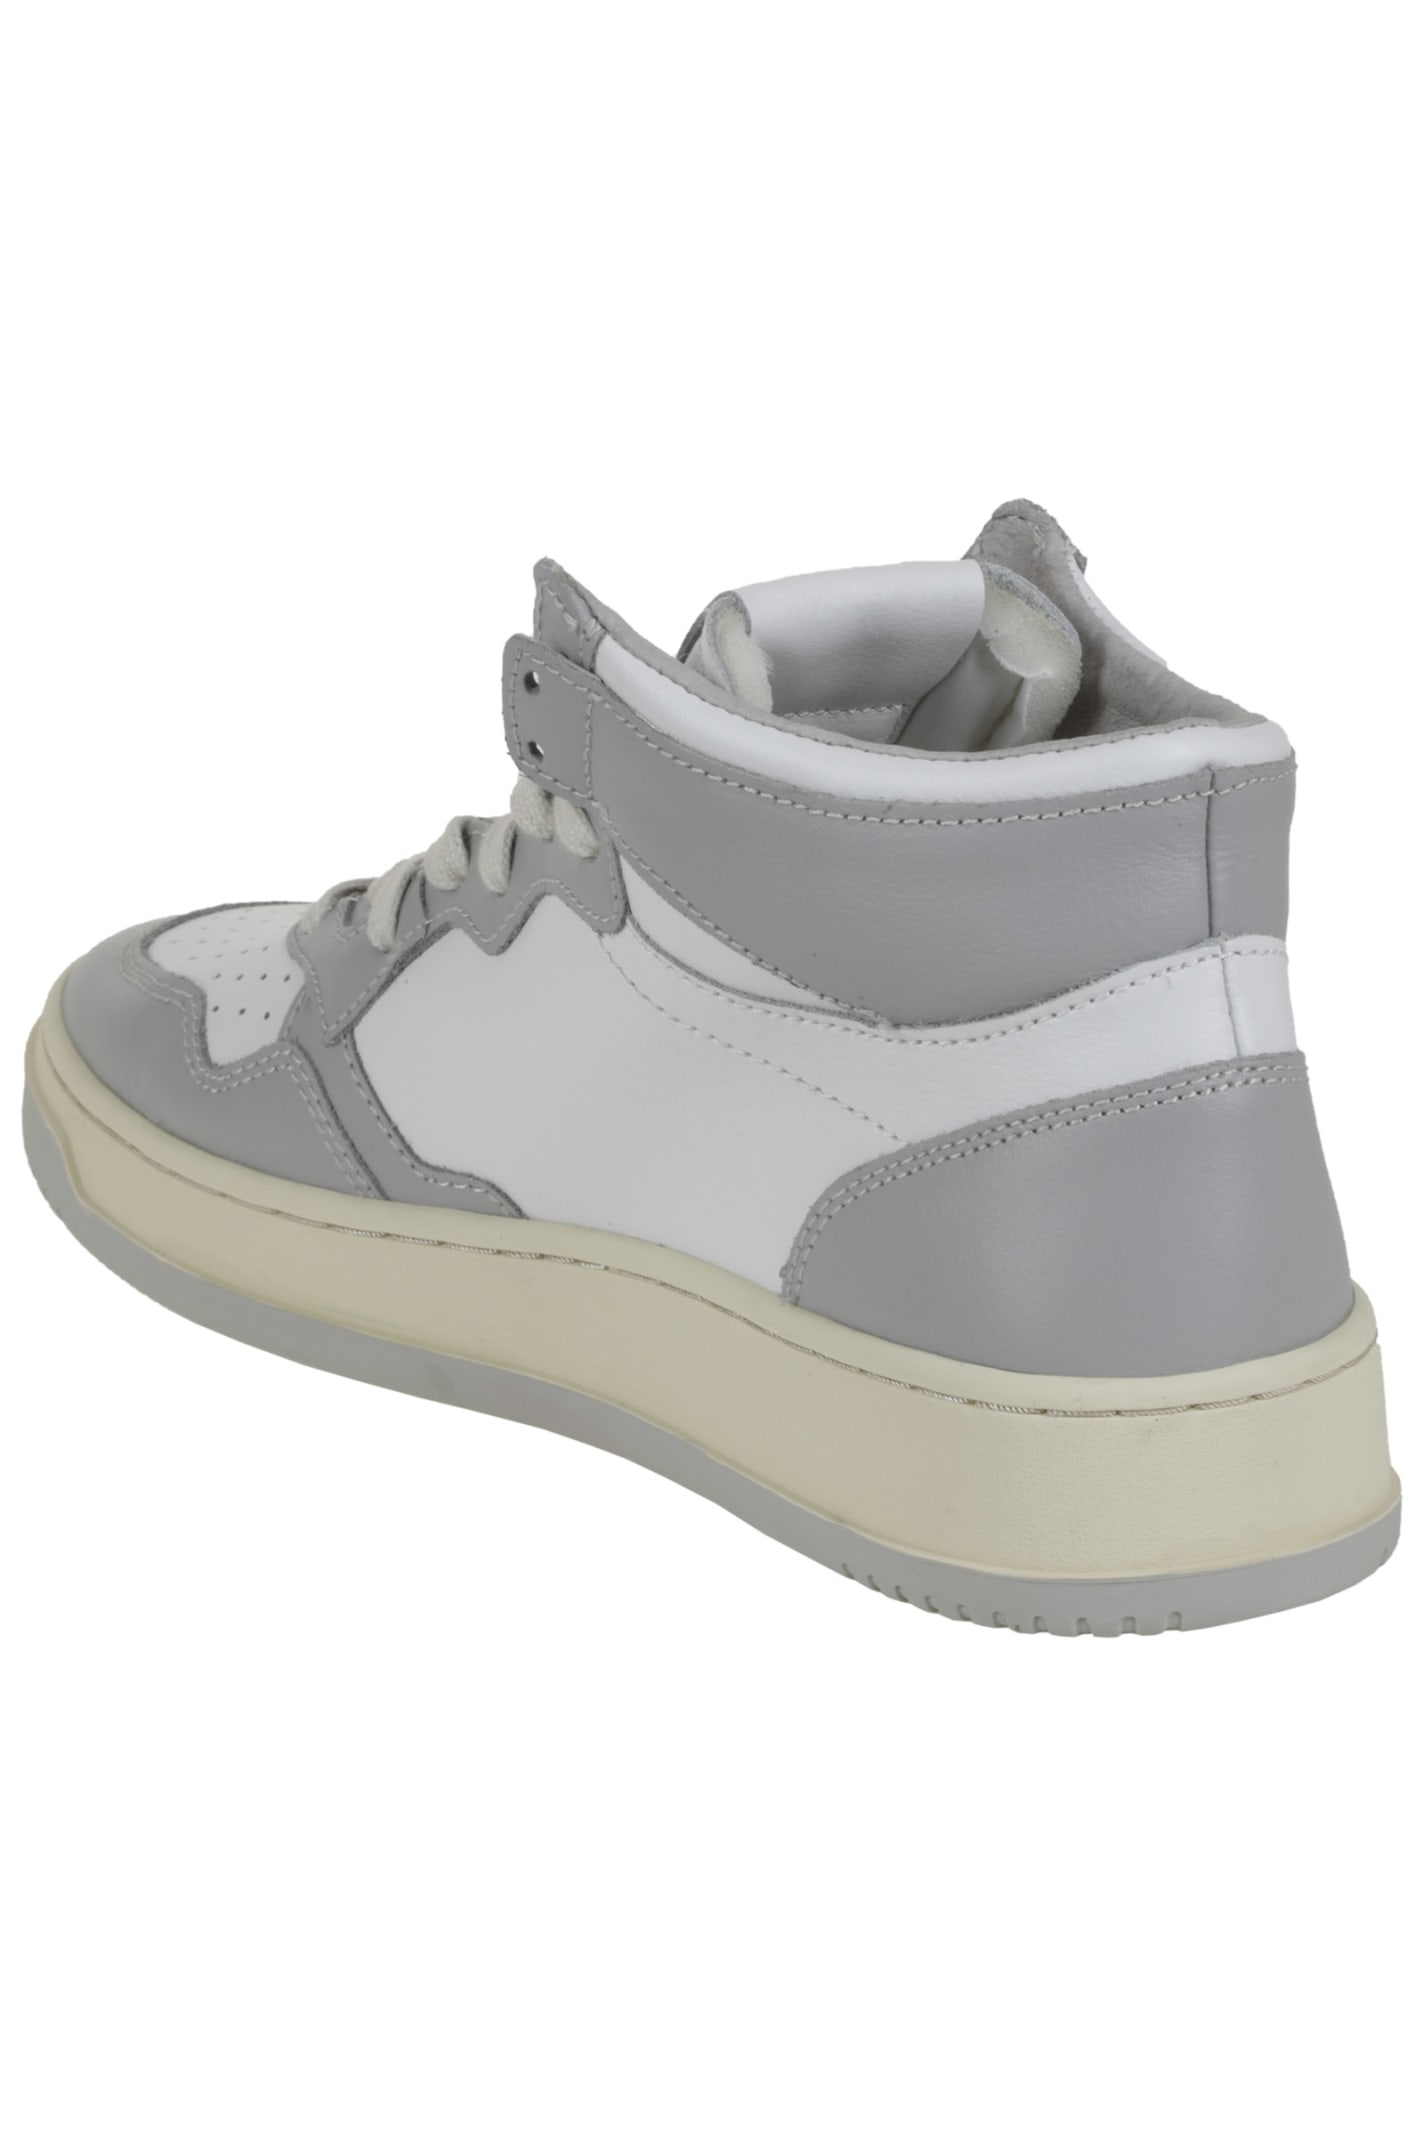 Shop Autry 01 Mid Leat Leat In White/grey